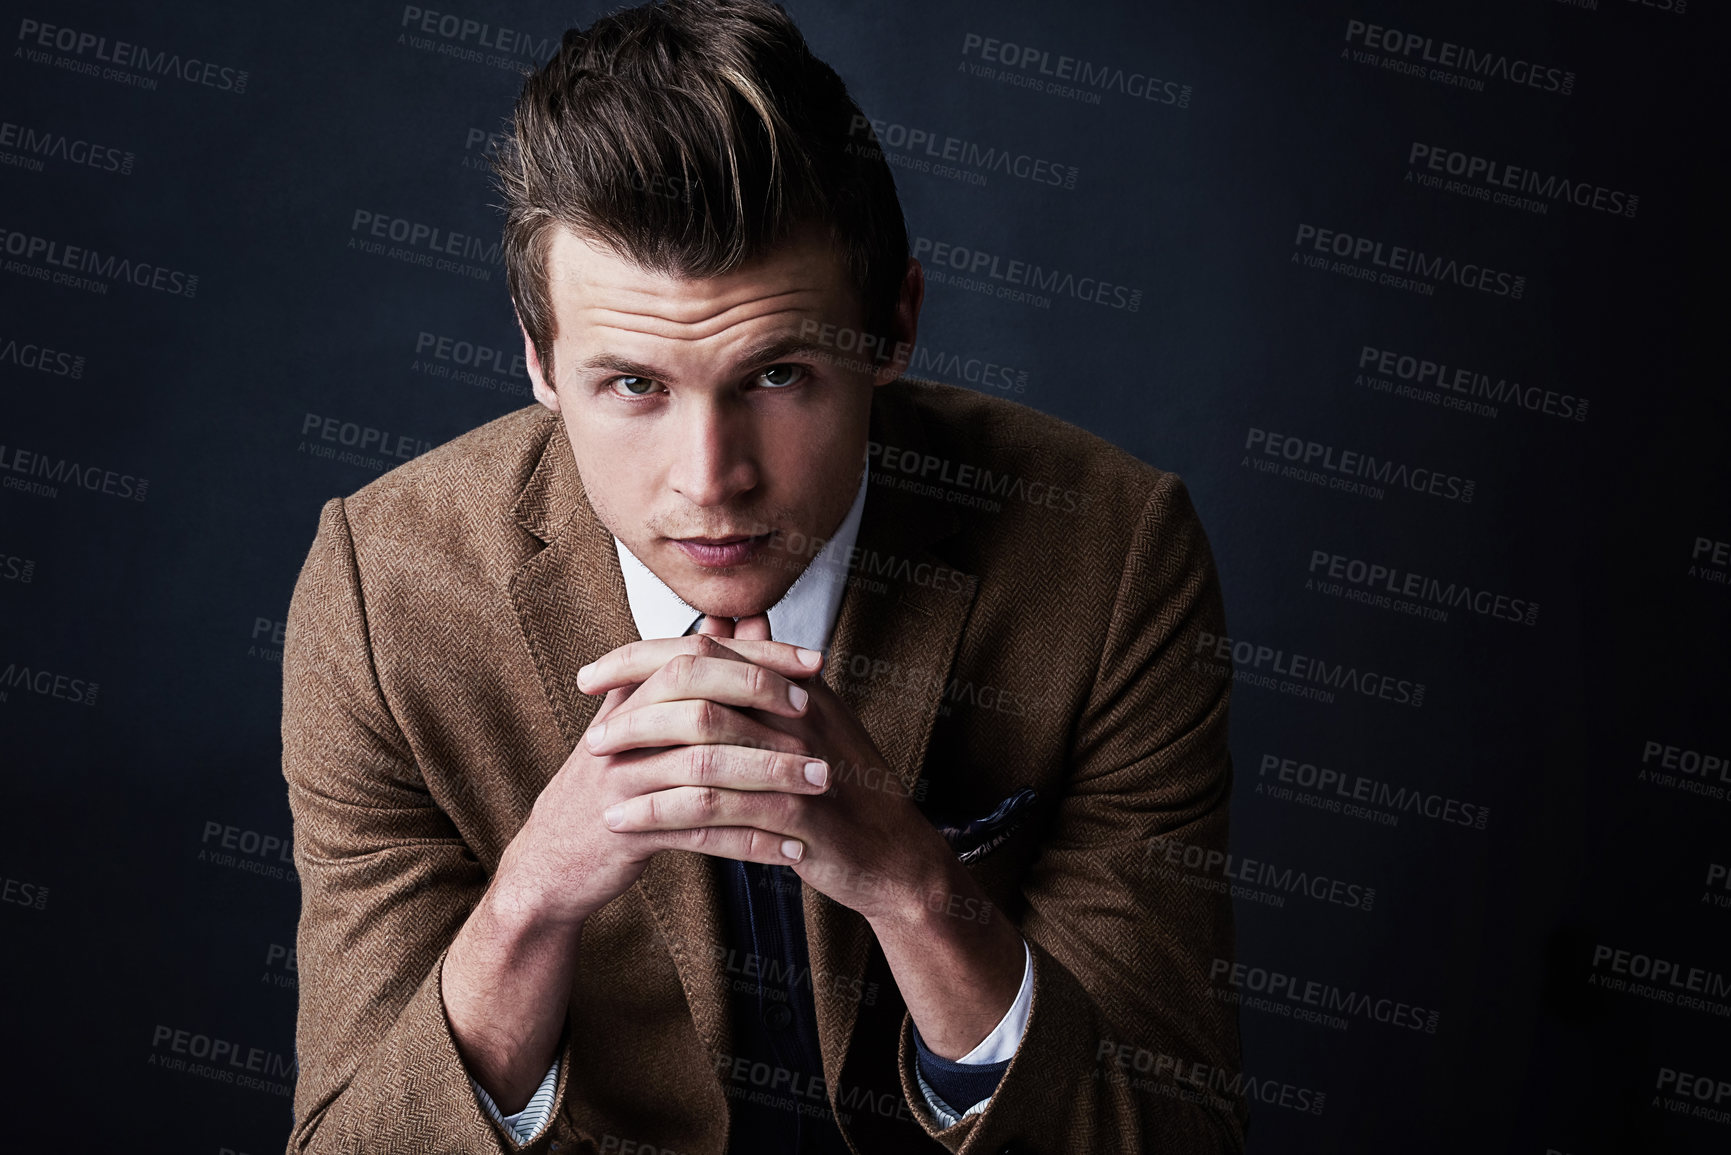 Buy stock photo Studio shot of a young businessman against a dark background